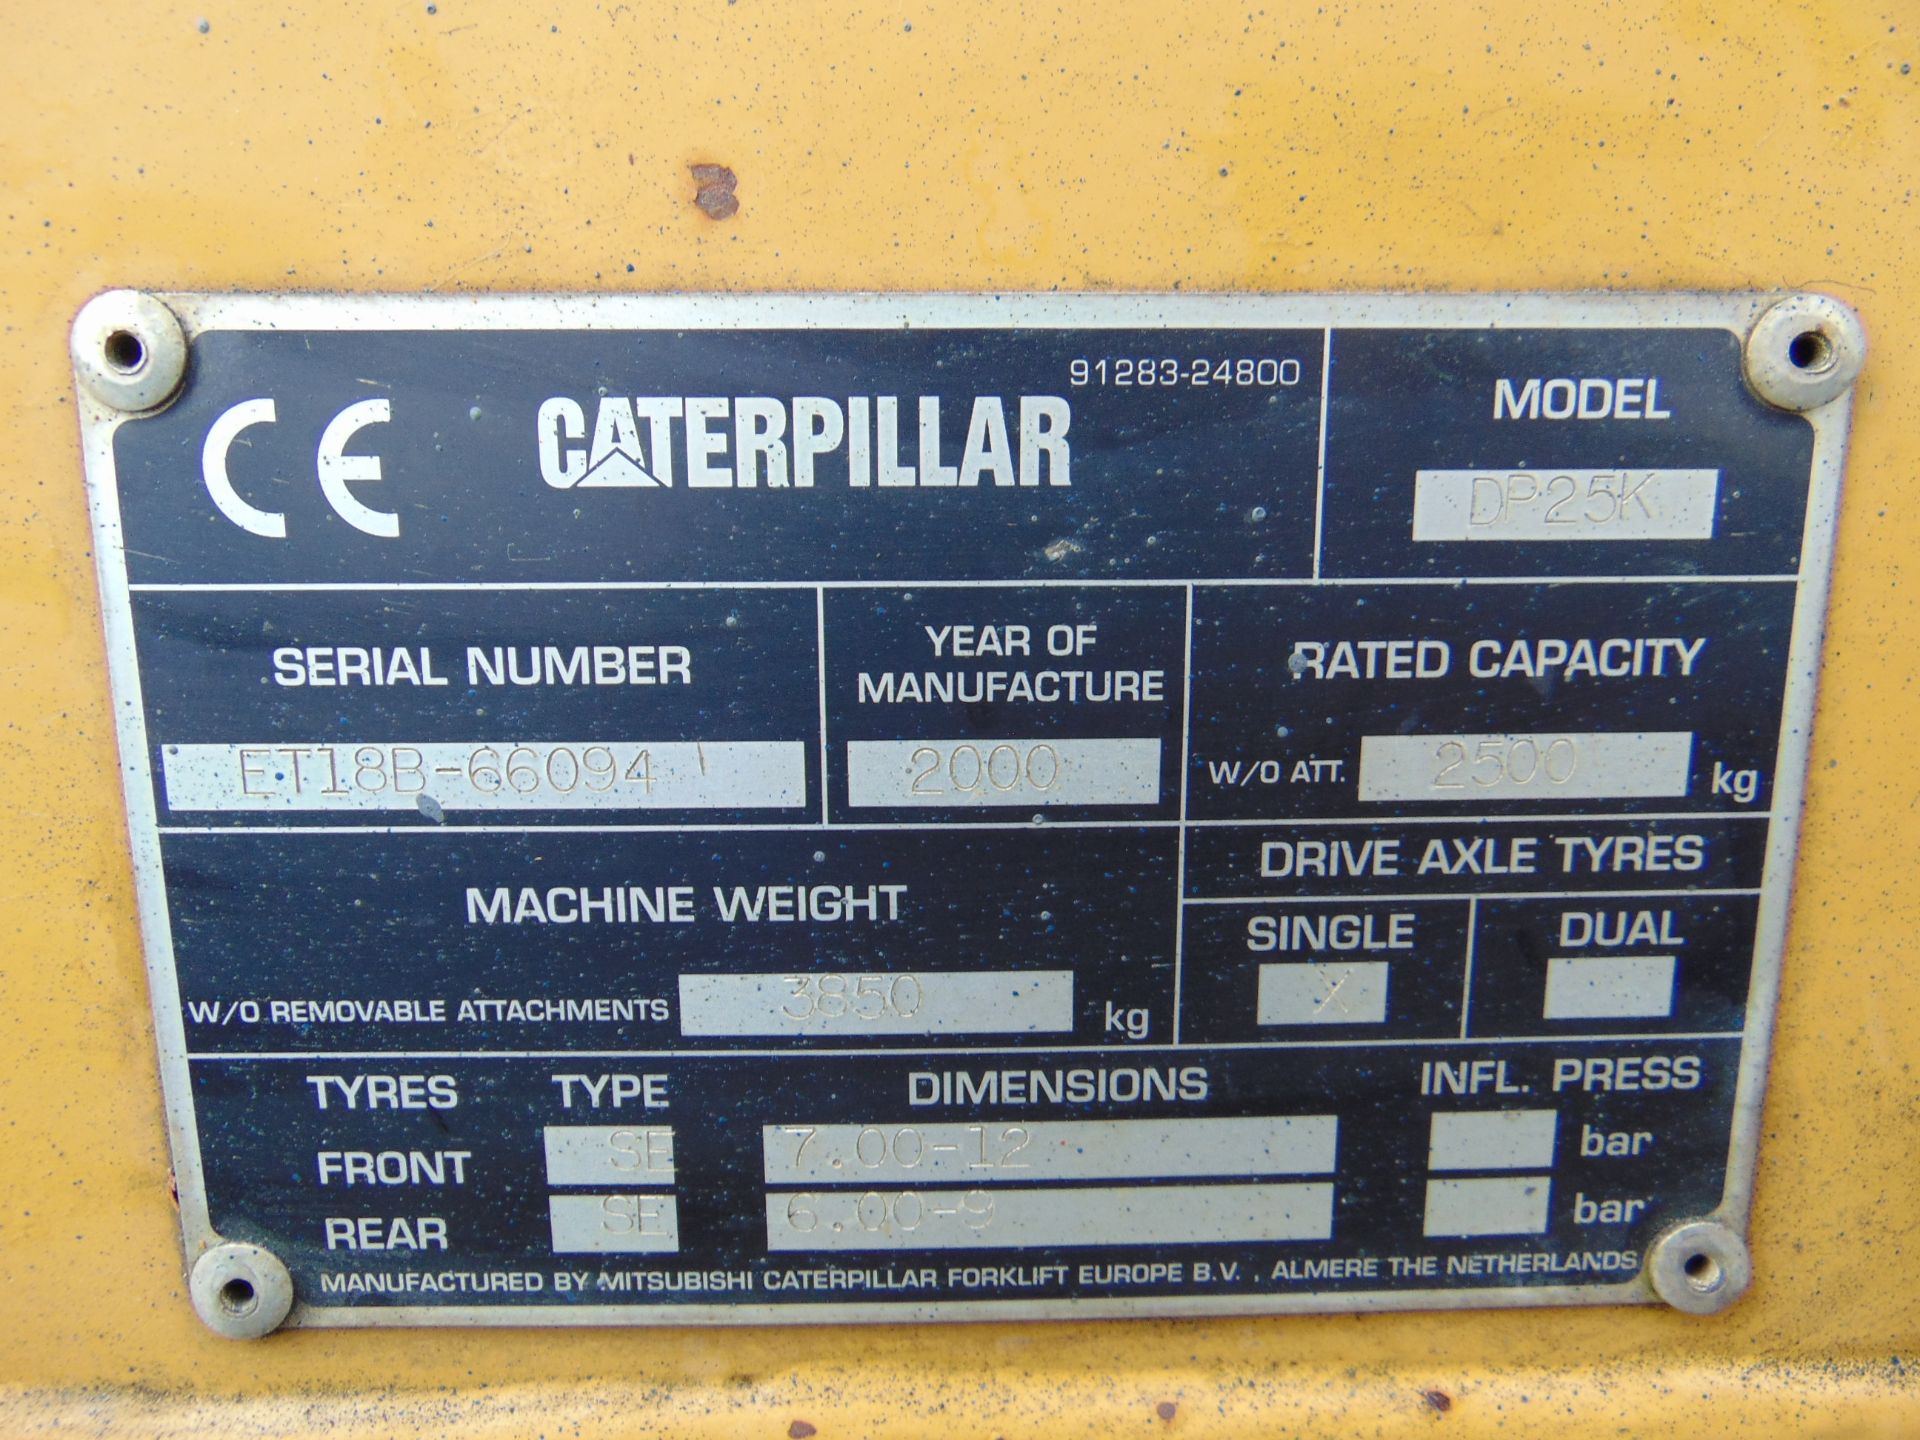 Caterpillar DP25K Counter Balance Diesel Forklift ONLY 3,725 HOURS! - Image 24 of 24